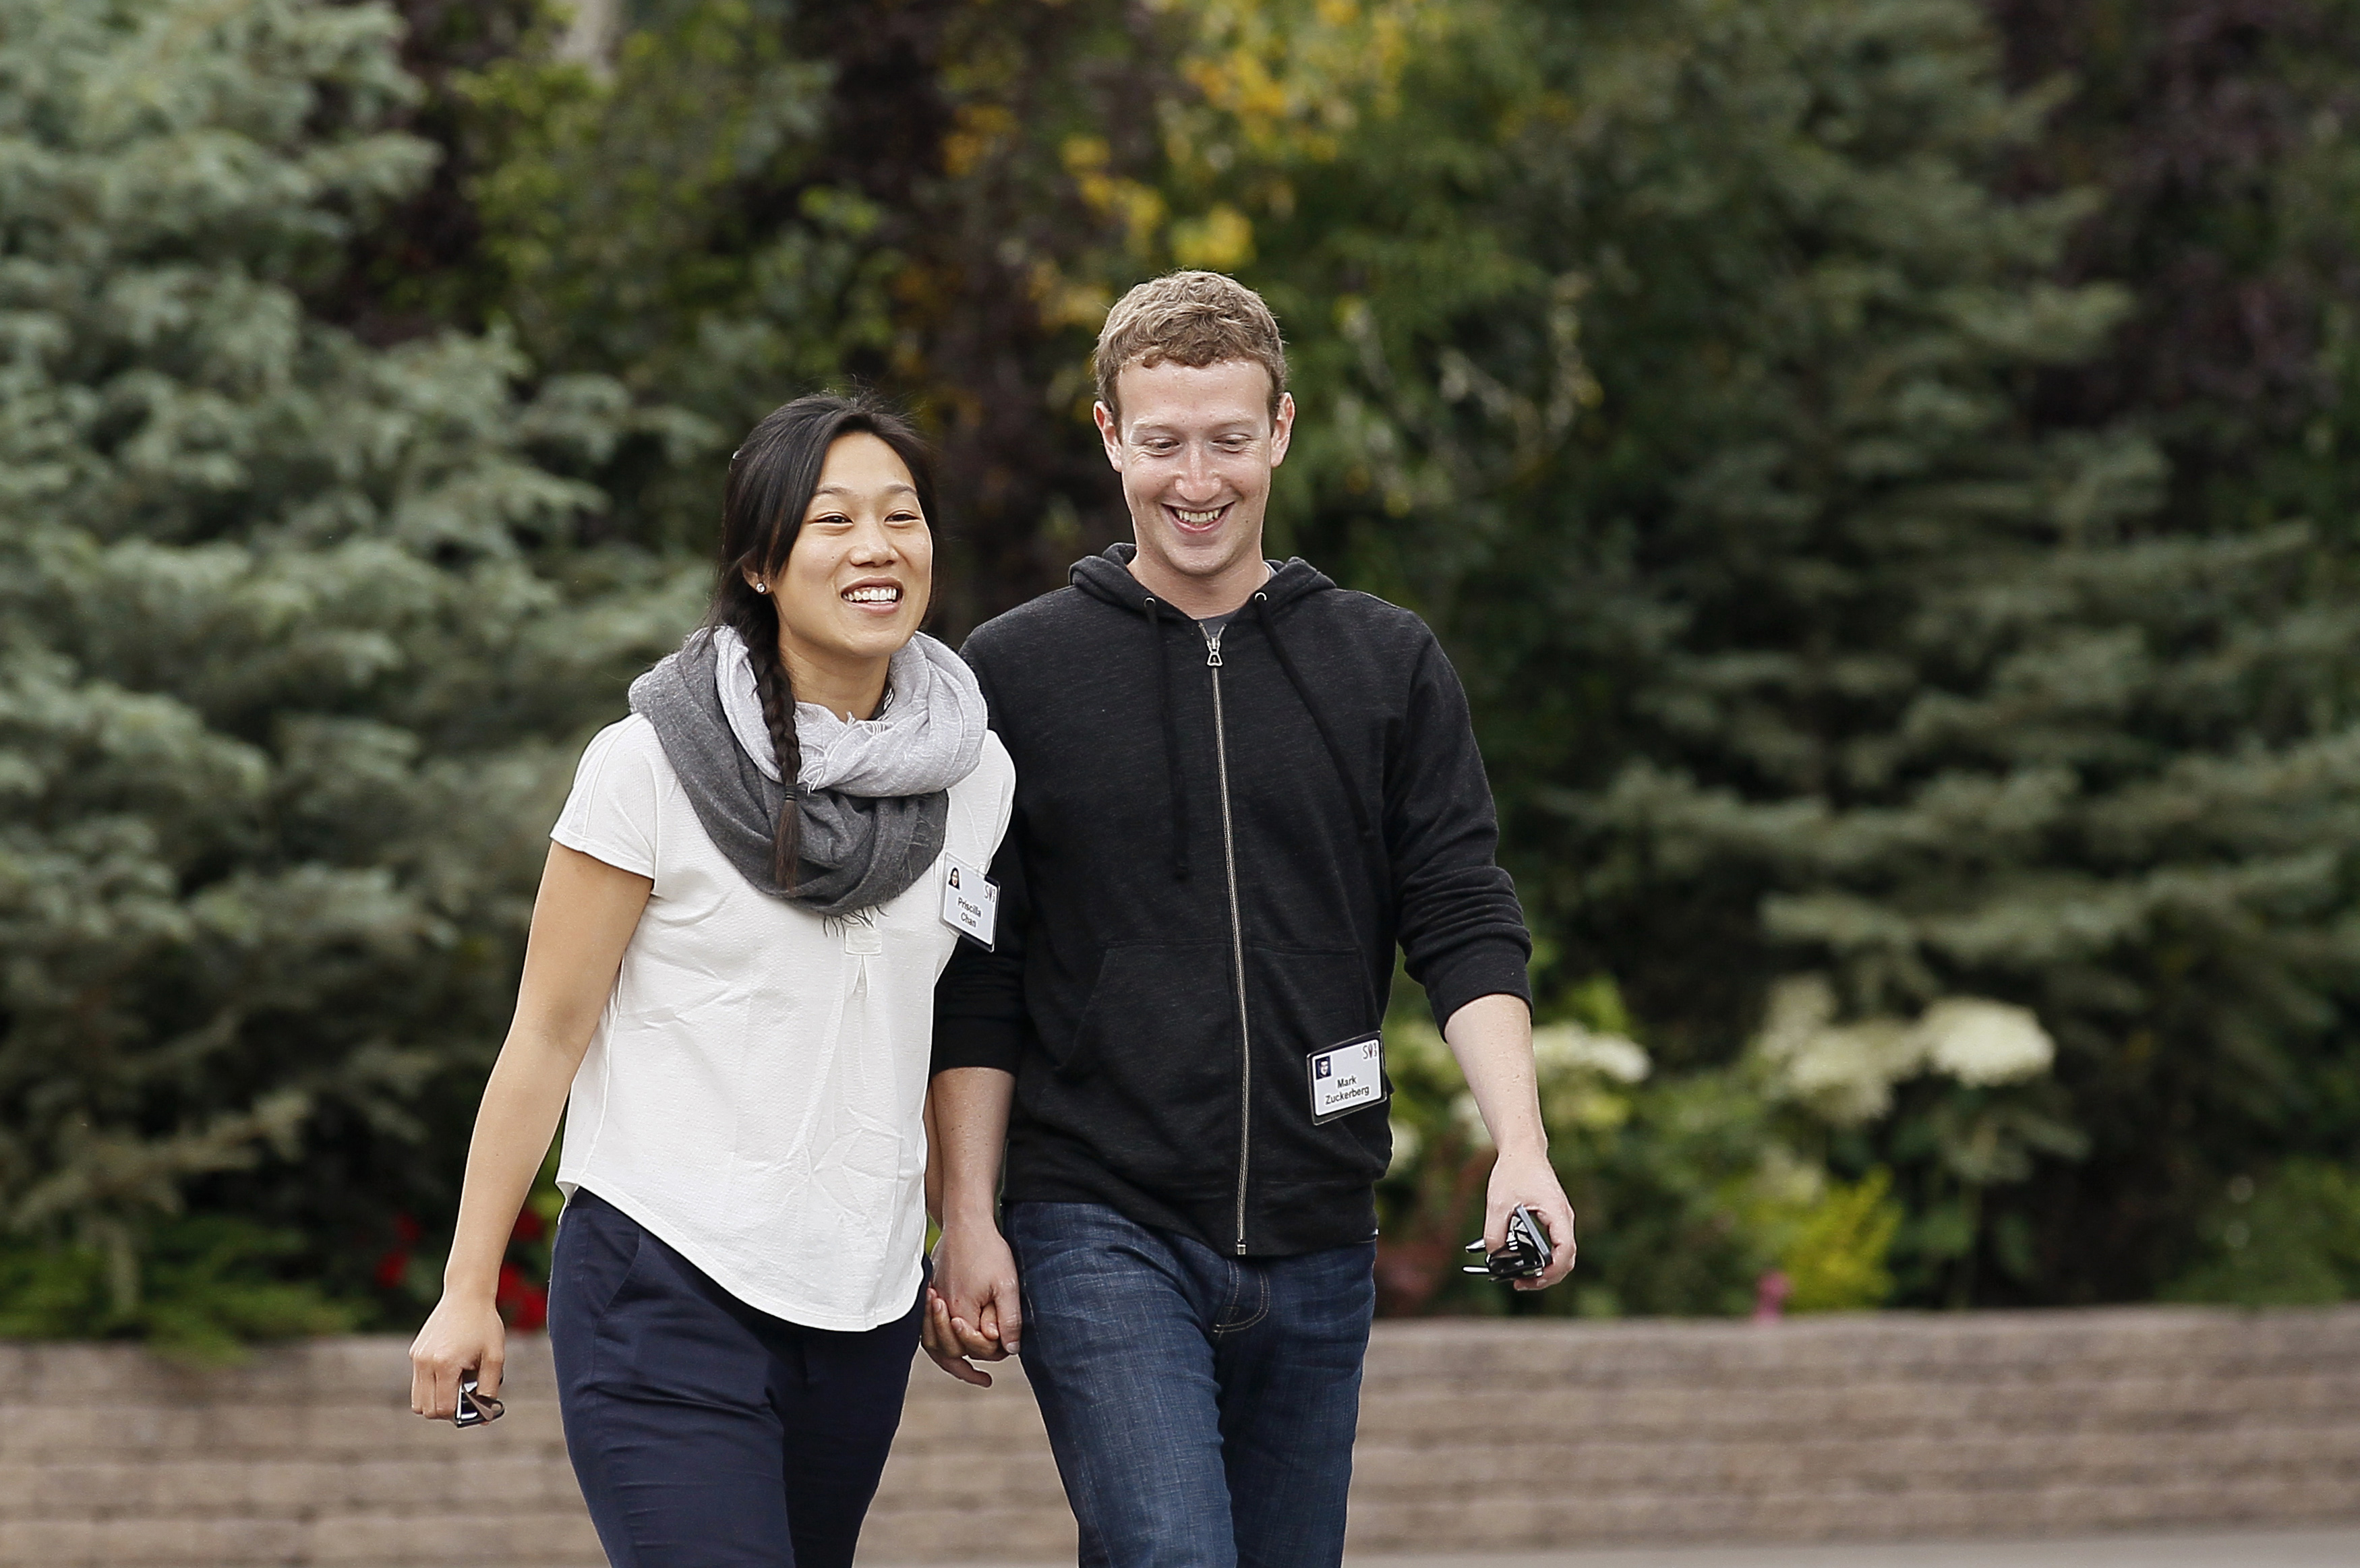 Facebook CEO Mark Zuckerberg walks with his wife Priscilla Chan at the annual Allen and Co. conference at the Sun Valley, Idaho Resort on July 11, 2013. (Rick Wilking—Reuters)